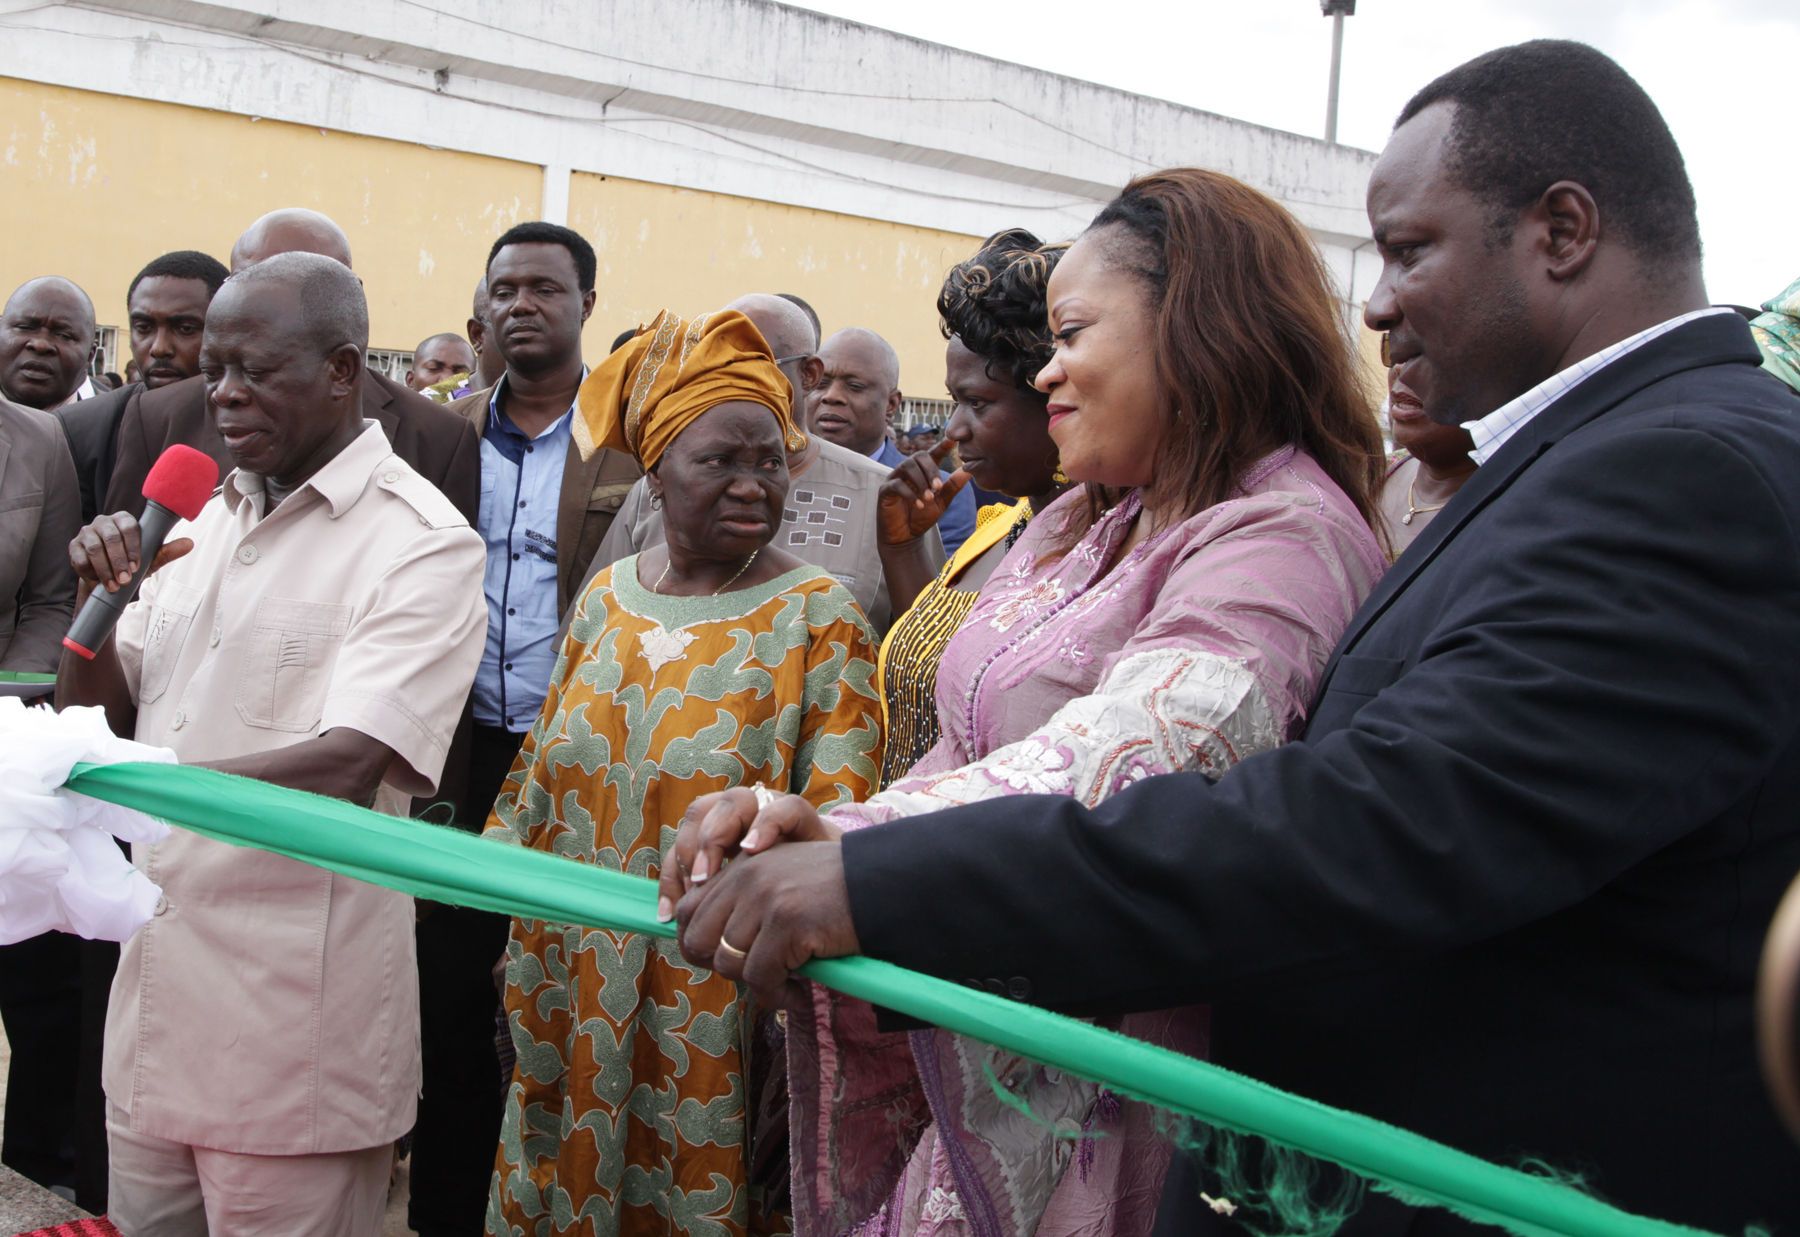 From left: Governor Adams Oshiomhole of Edo State, Pastor (Mrs) Clara Ogbemudia, wife of Dr Samuel Ogbemudia, Mrs Amen Ogbemudia-Uhunmwangho, daughter, Mrs Yetunde Ogbemudia, wife and Samuel Ogbemudia (Jnr) at the unveiling of a statue in honour of Dr. Samuel Ogbemudia at the state-owned stadium in Benin City on Wednesday.